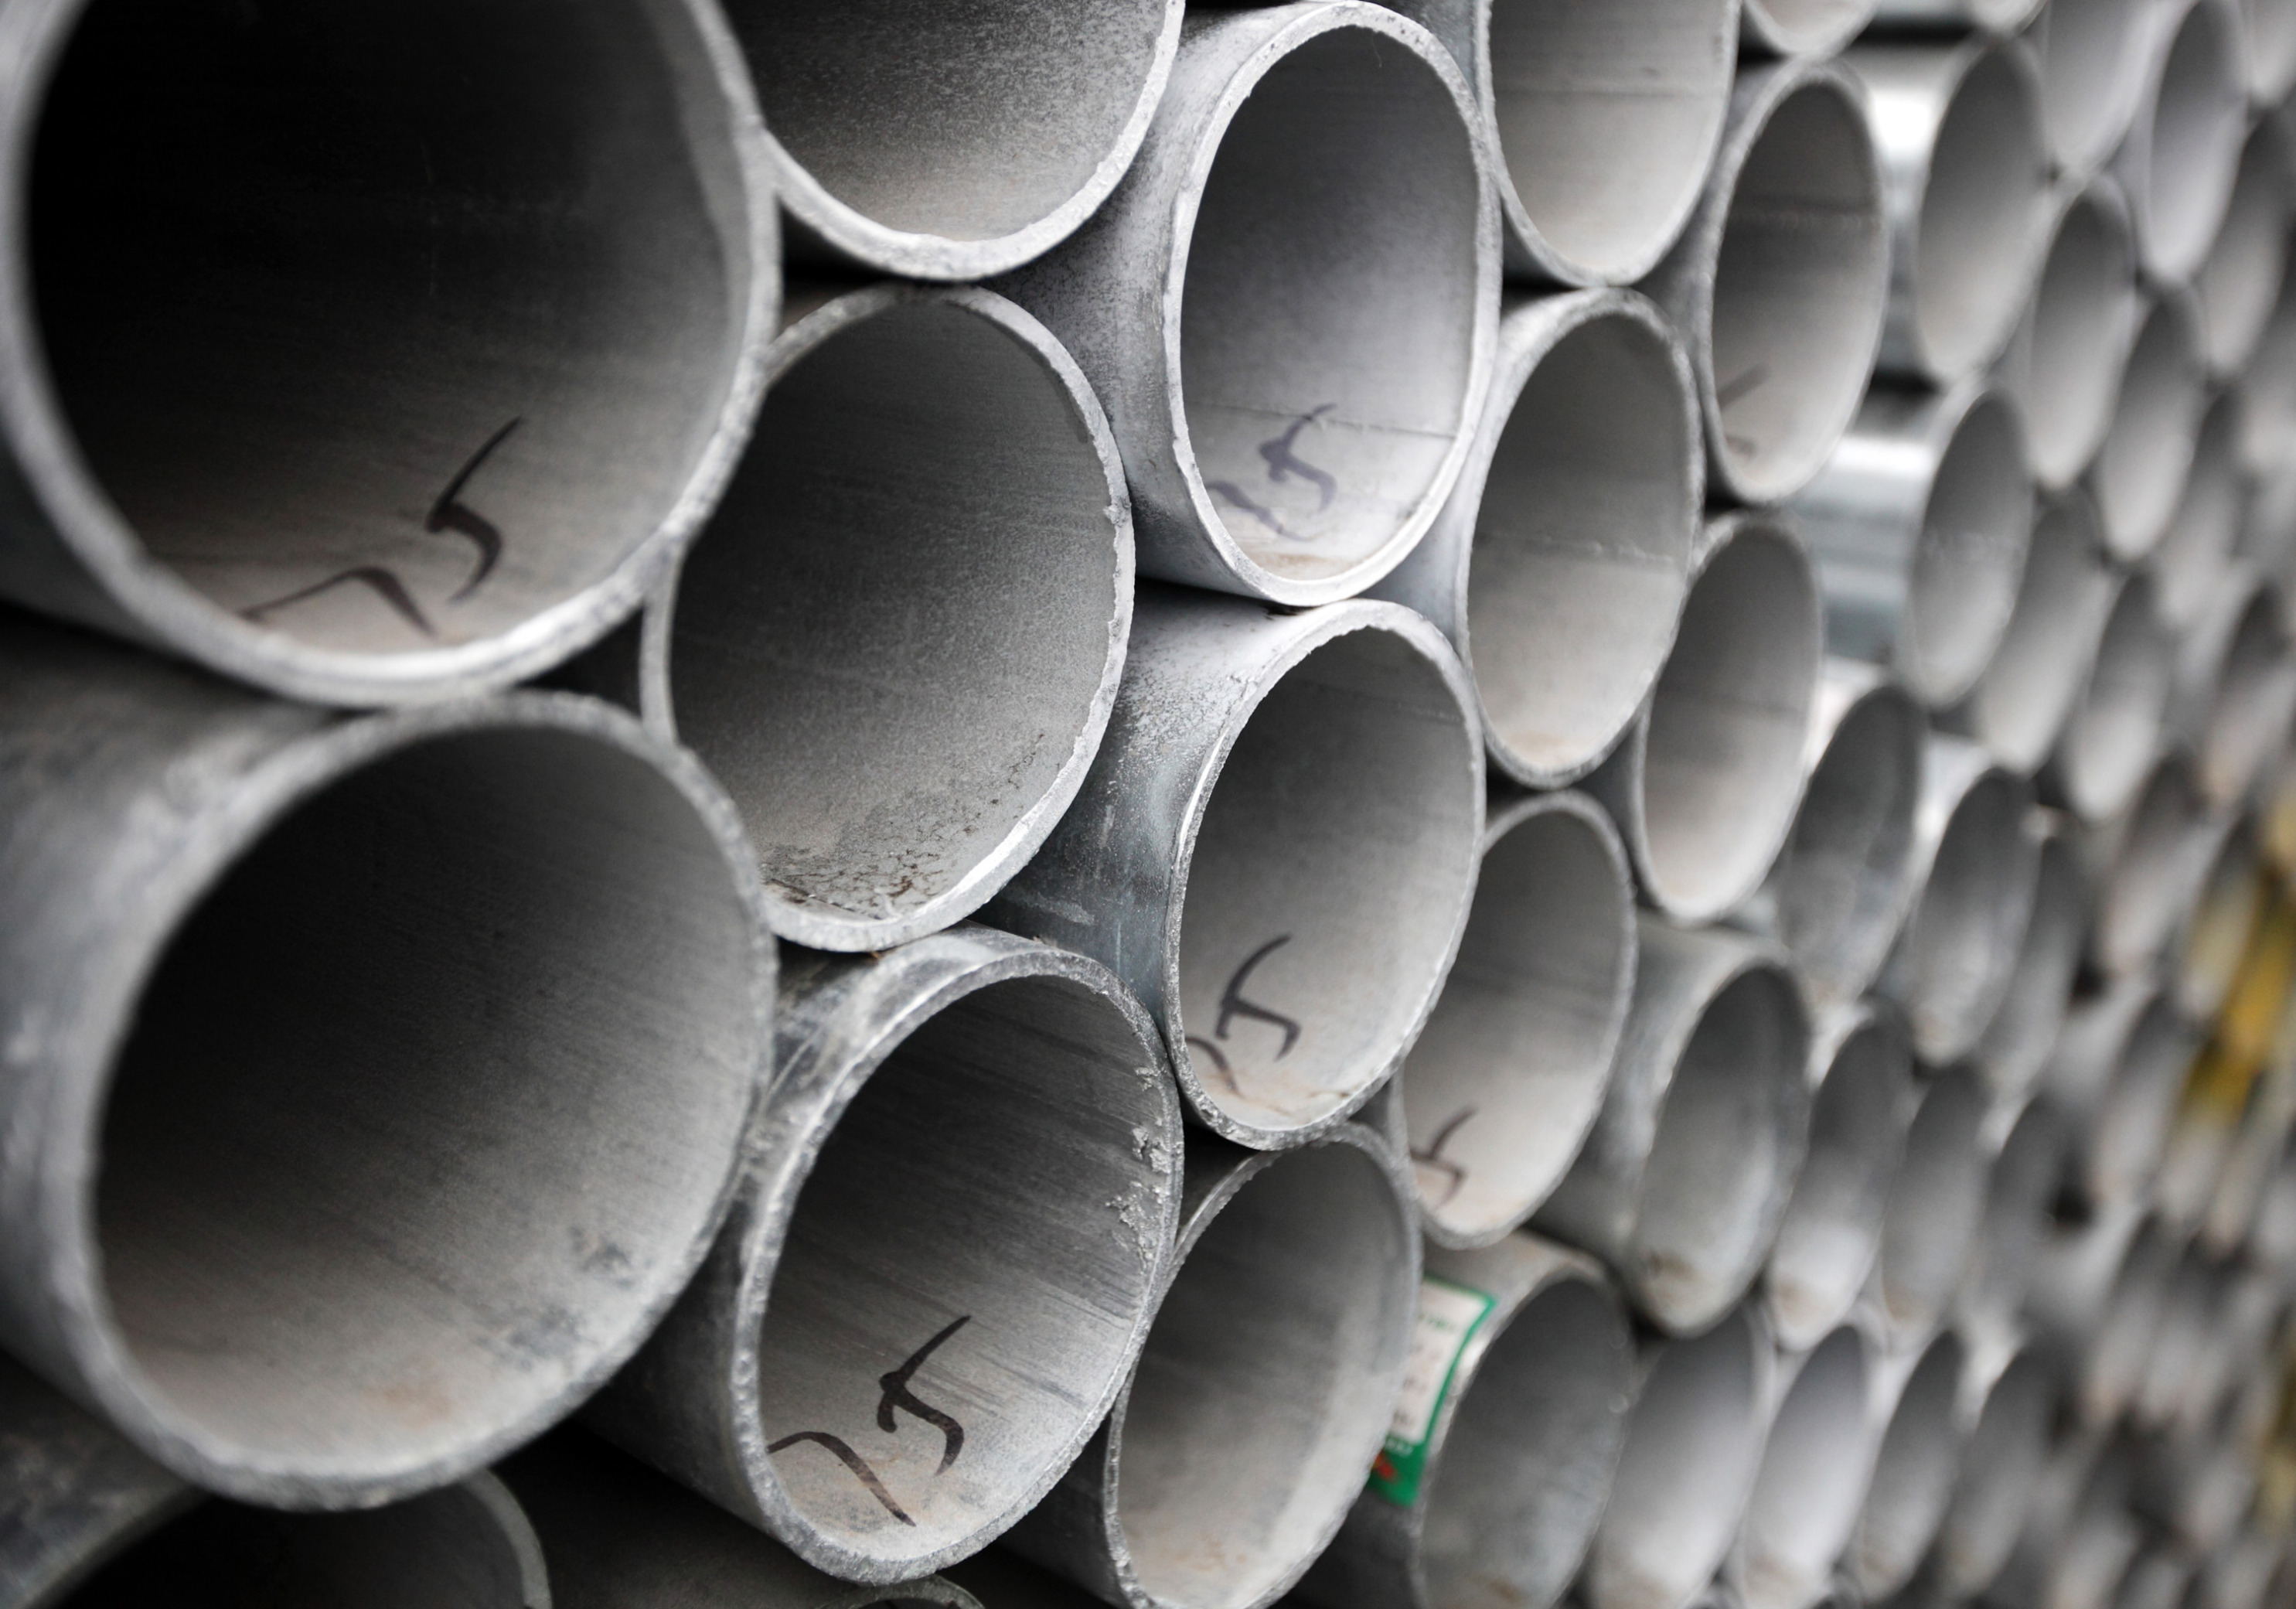 Steel pipes are stacked at a storage yard in Shanghai, China, on Friday, Feb. 1, 2013. Commodities rose, capping the longest run of weekly gains in 17 years, on mounting speculation that the economies in the U.S. and China will rebound, boosting demand for metals, energy and crops.